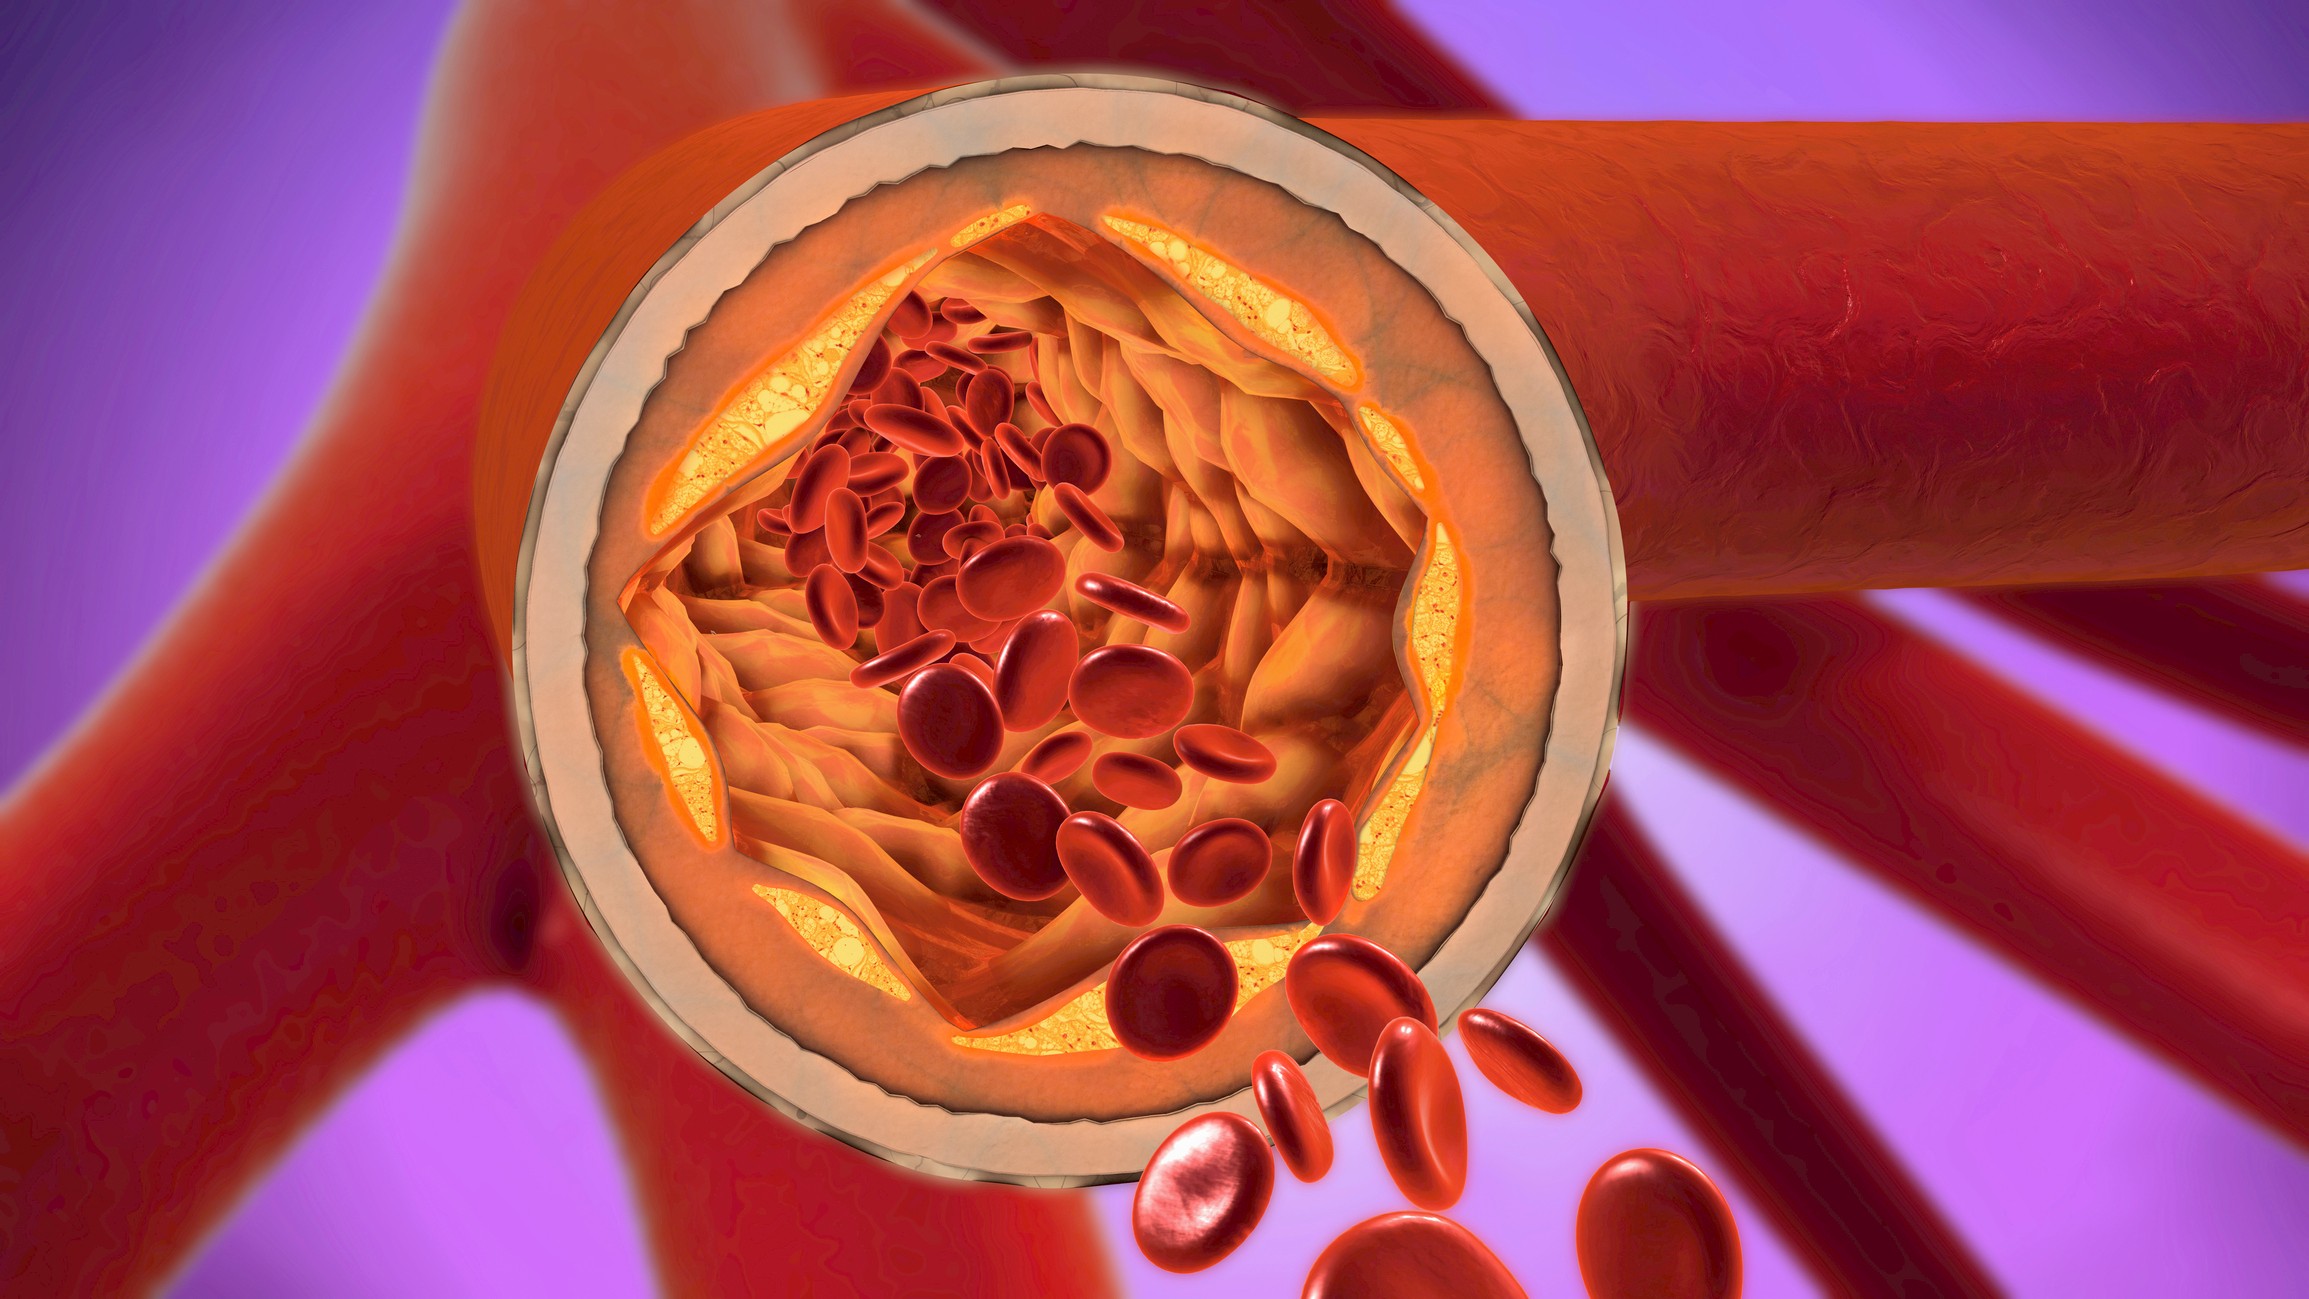 An illustration of atherosclerosis in a blood vessel.